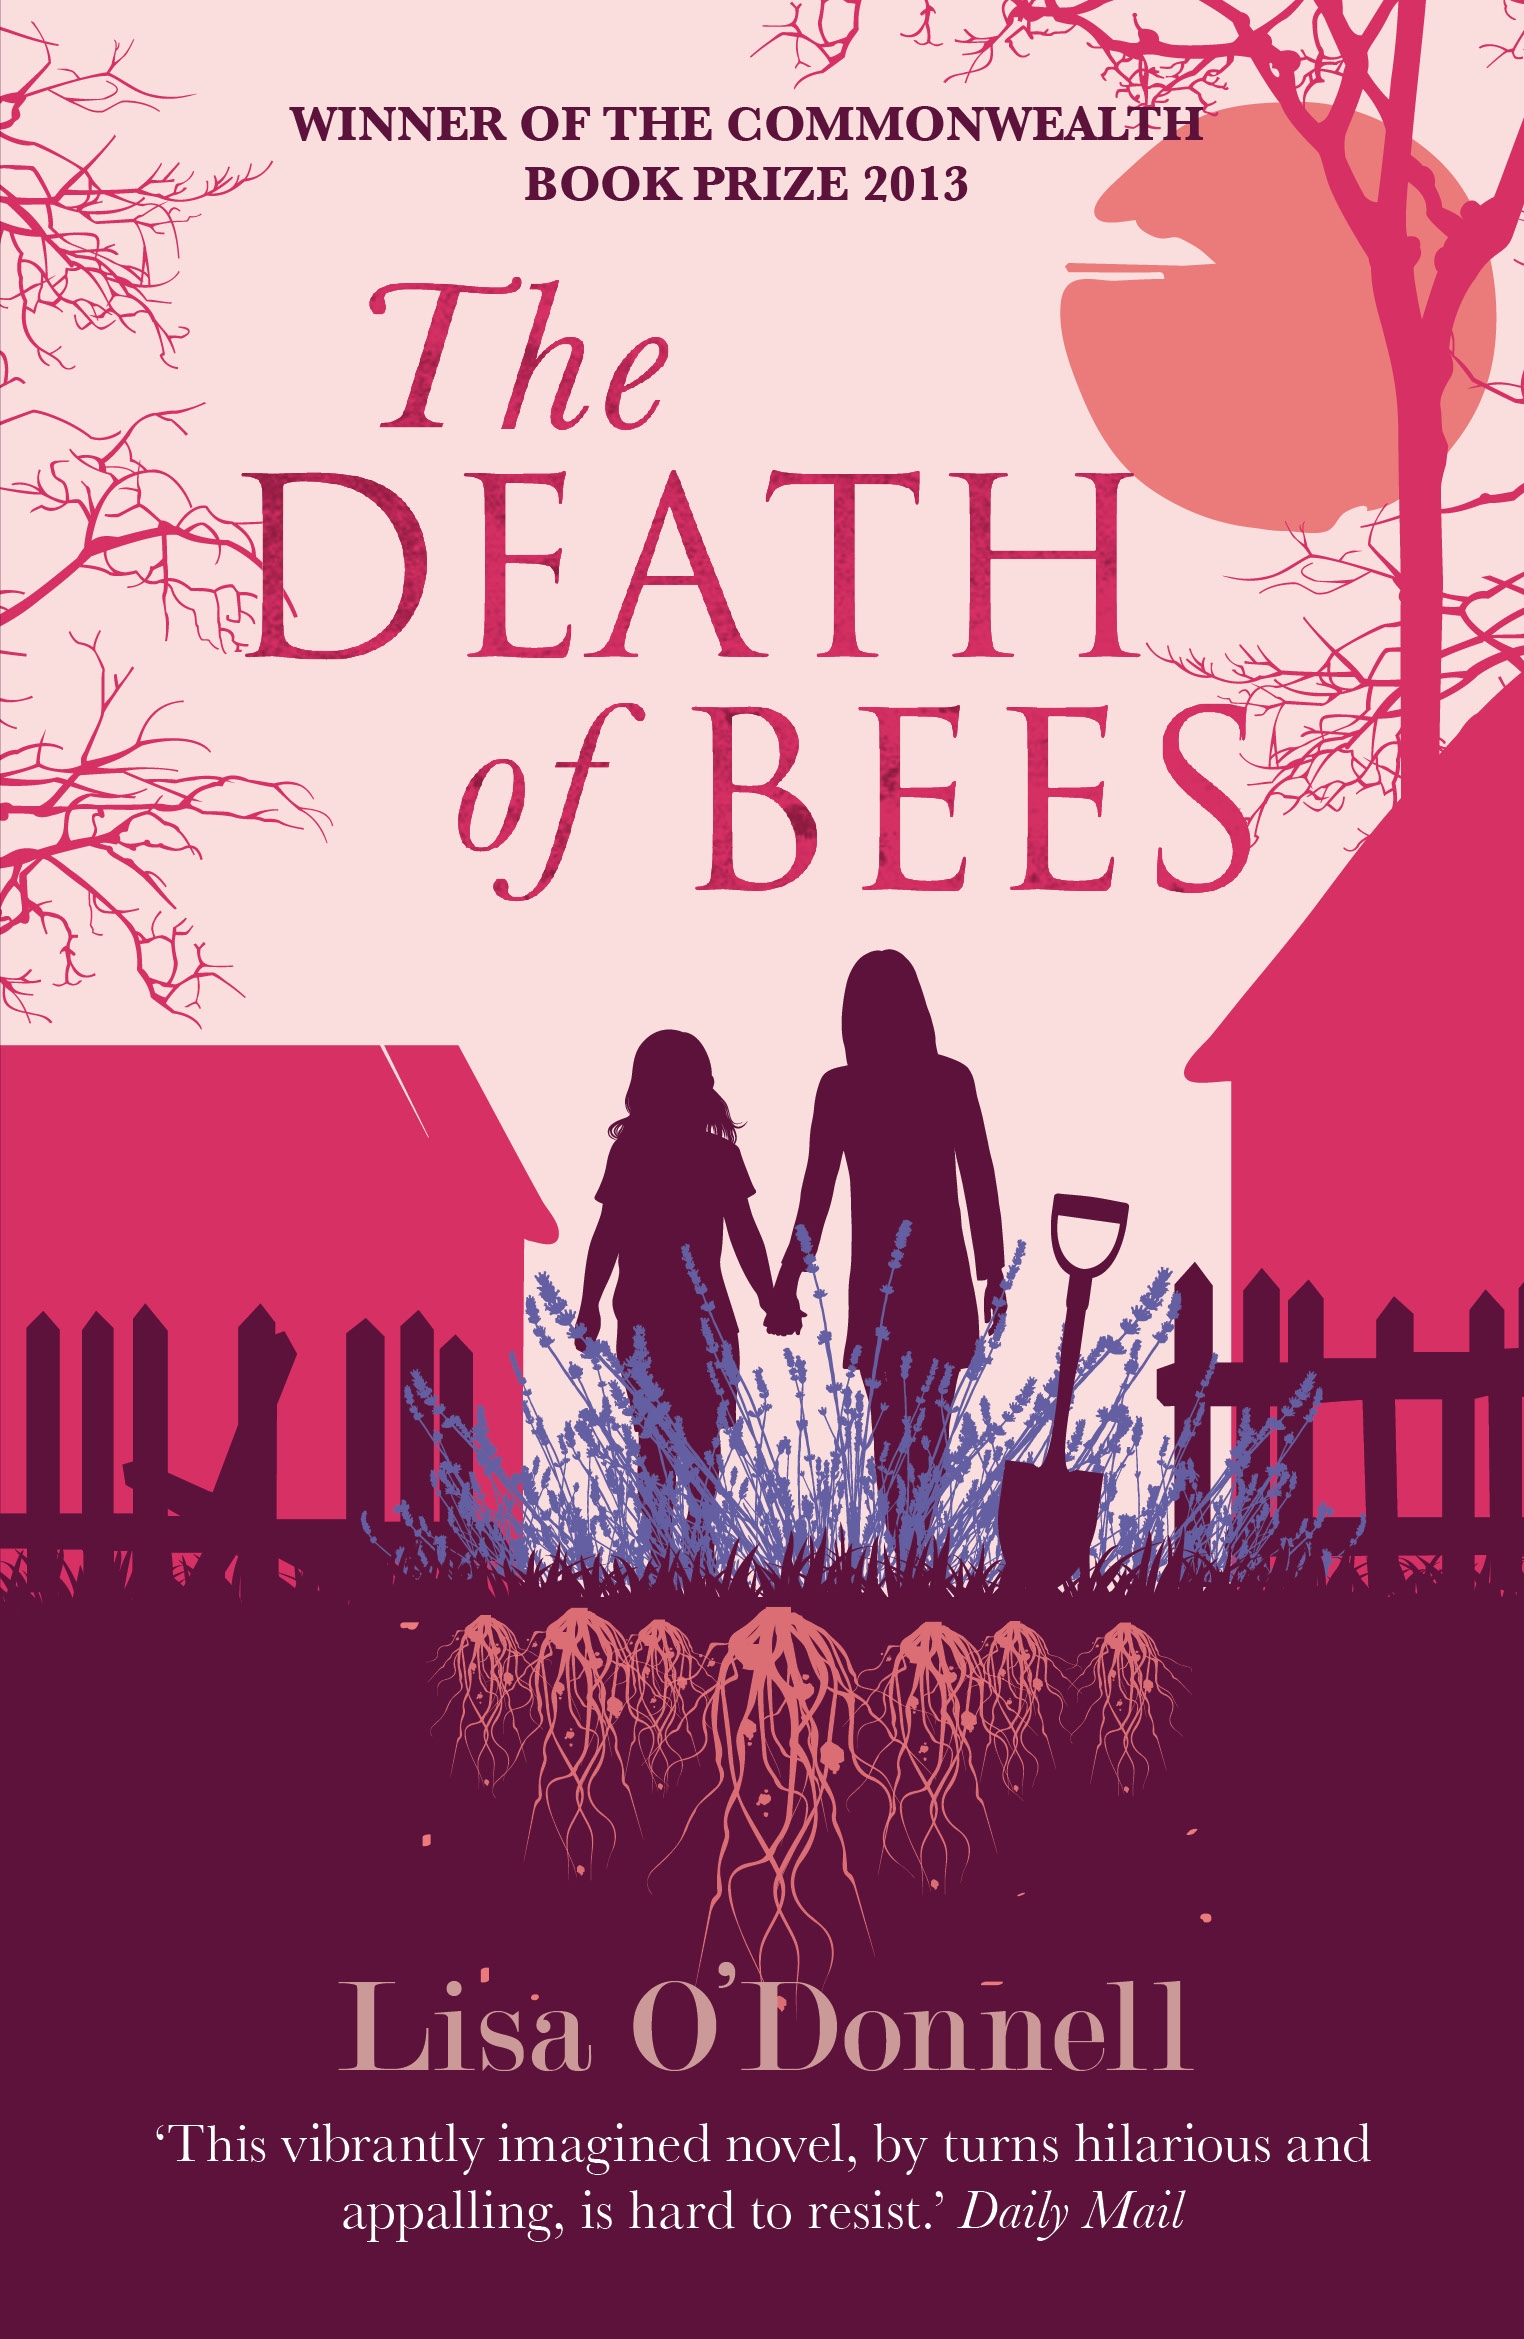 The Death of Bees by Lisa O'Donnell - Penguin Books Australia